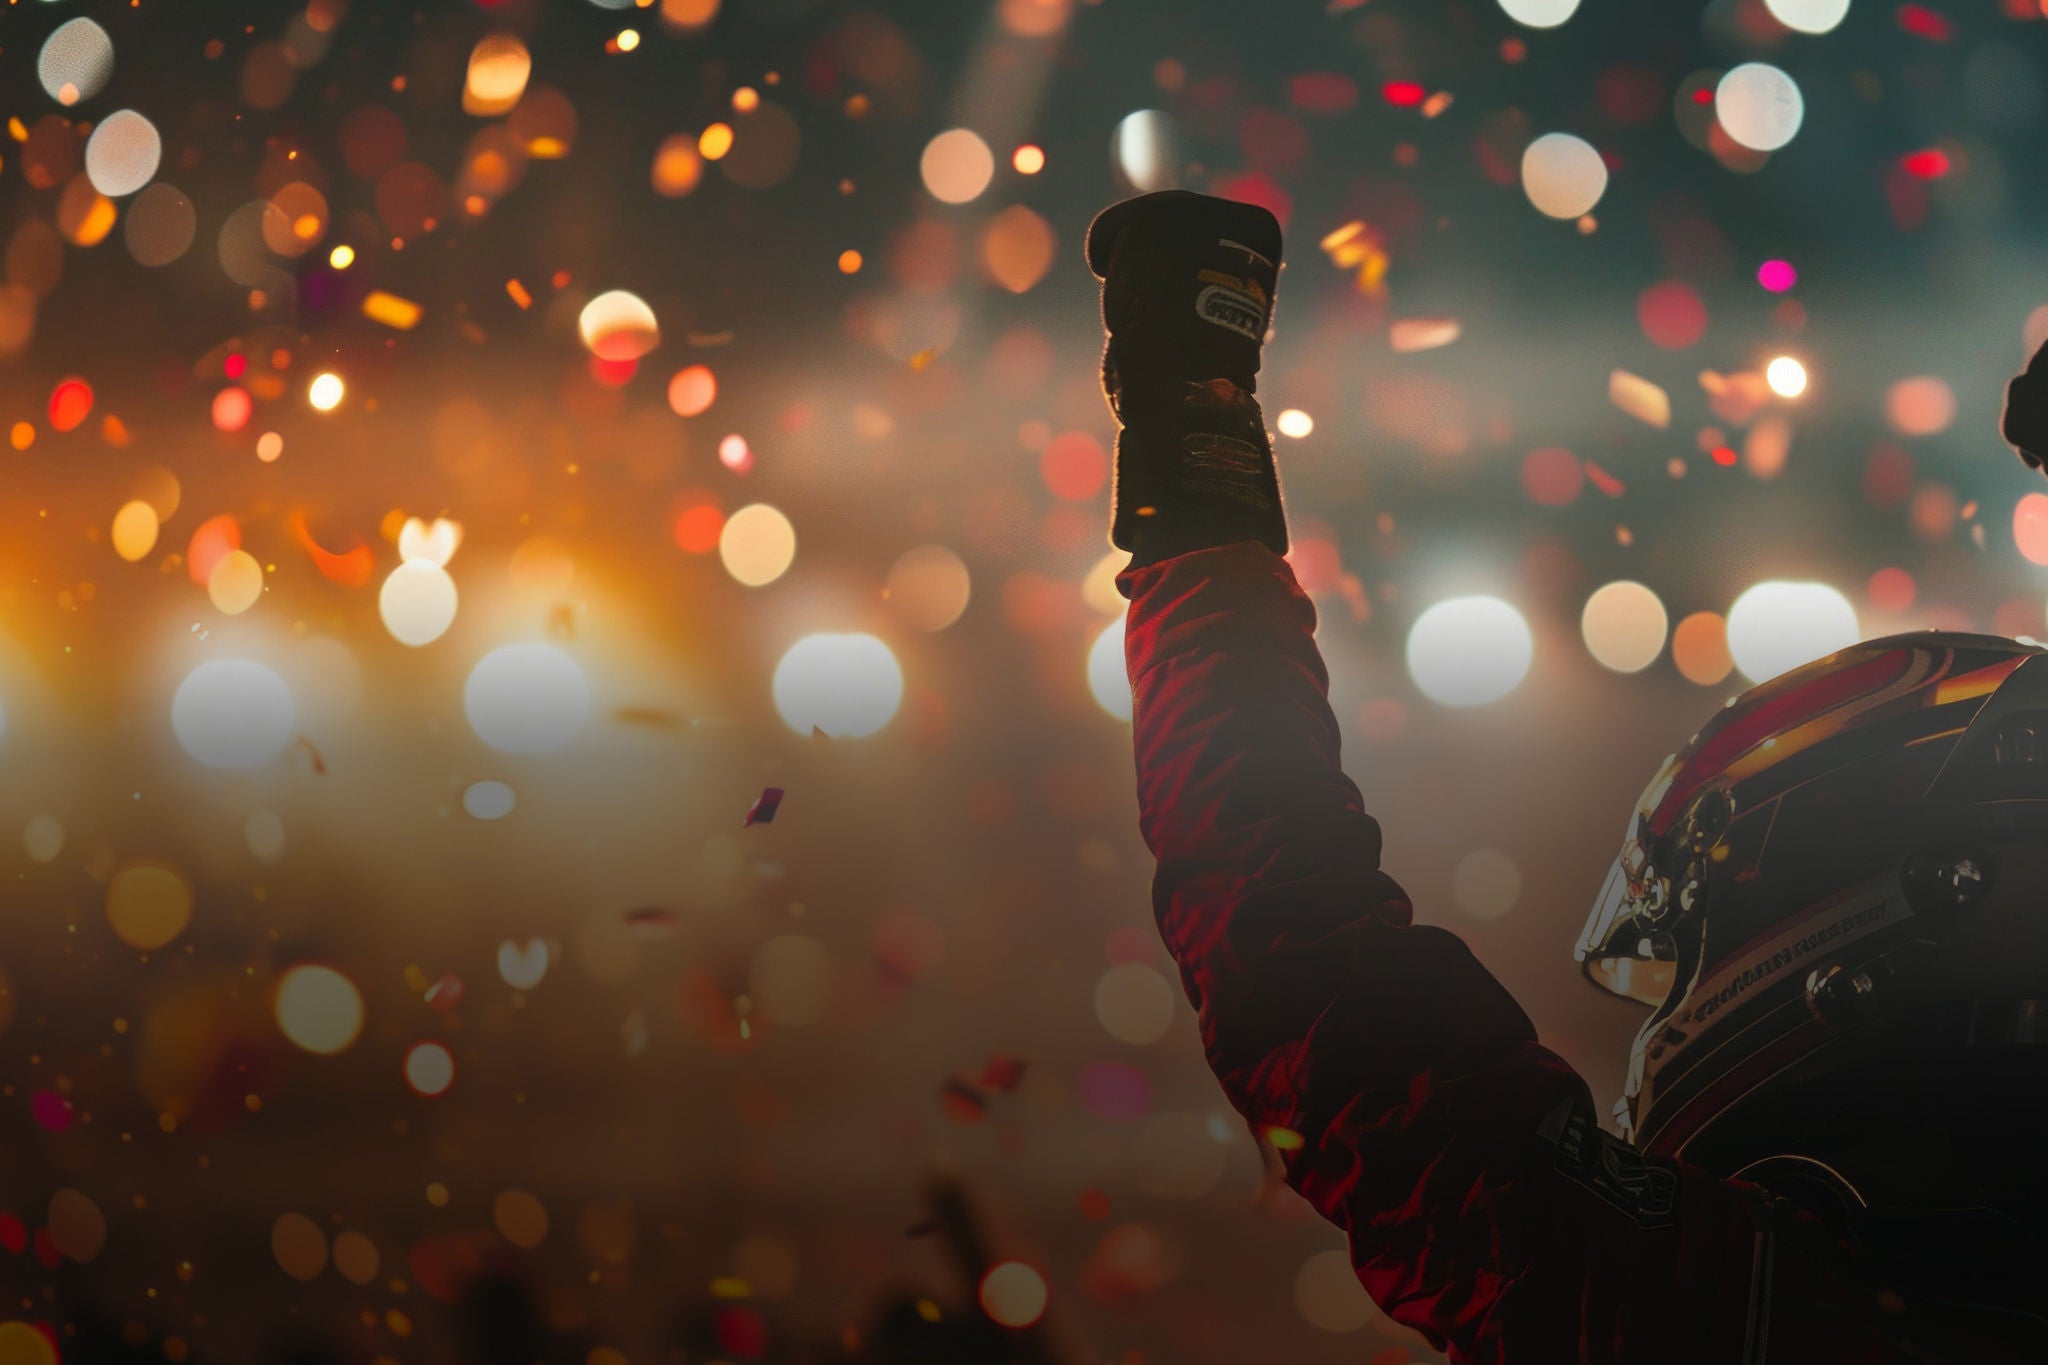 ey-race-car-driver-celebrating-the-win-in-a-race-against-bright-stadium-lights-and-confetti